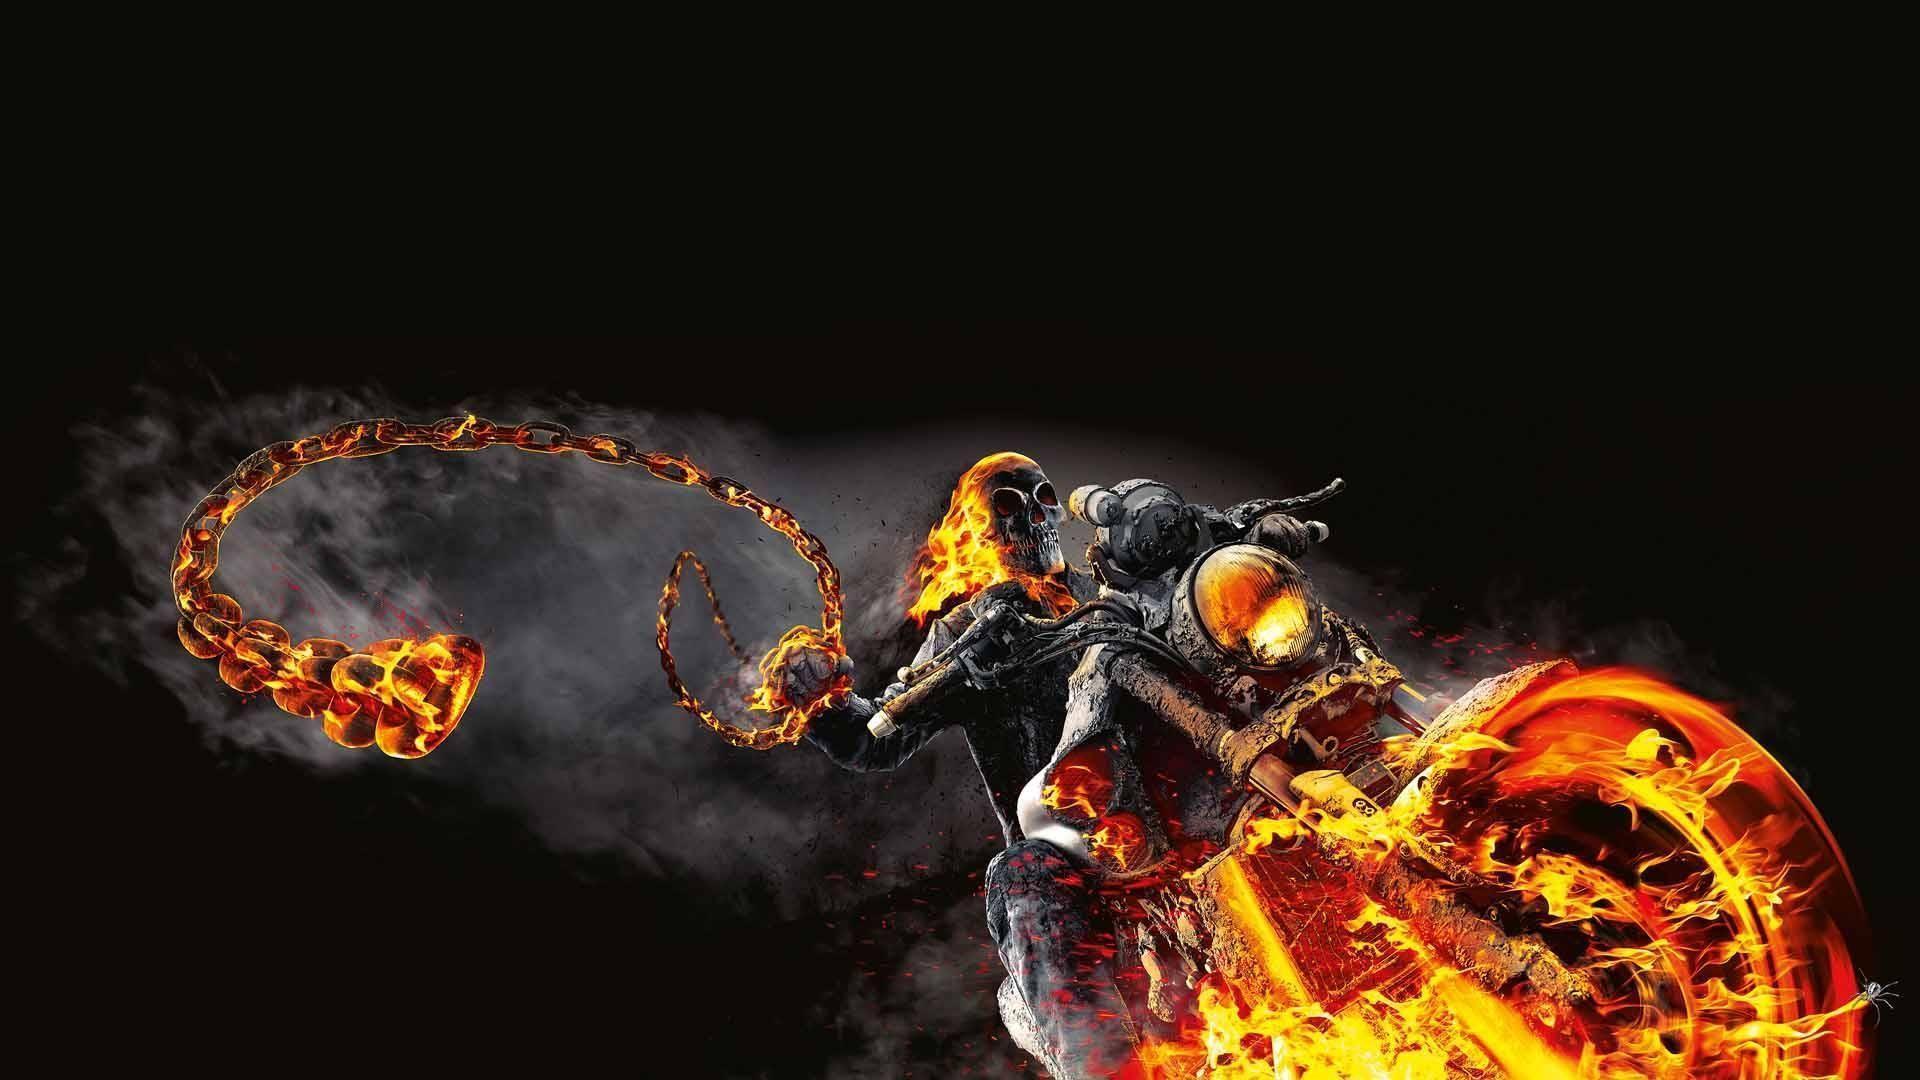 Ghost Rider HQ Wallpaper. Full HD Picture